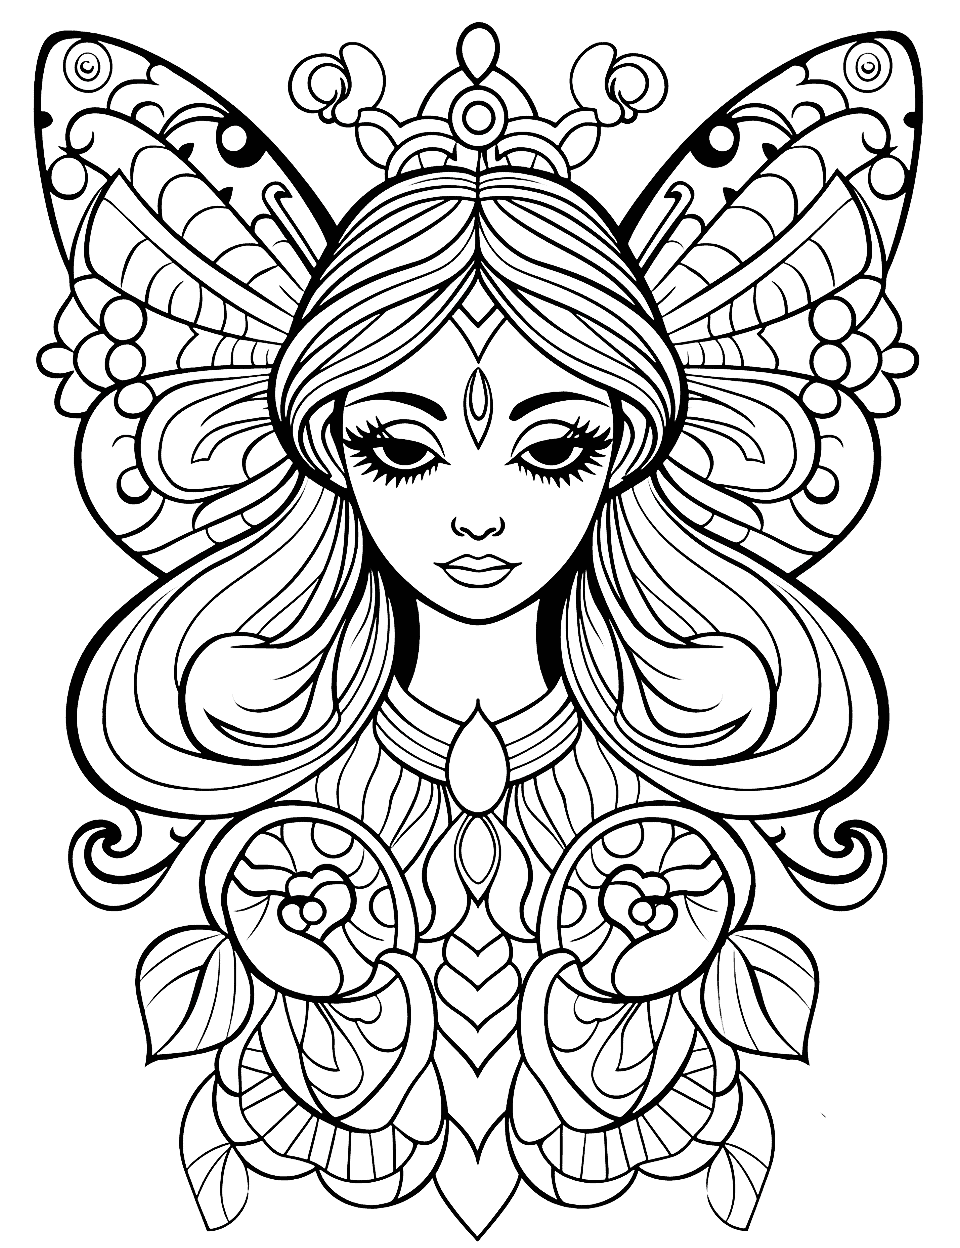 Abstract Fairy Design Adult Coloring Page - An abstract interpretation of a fairy, created with geometric shapes, patterns, and intricate details.